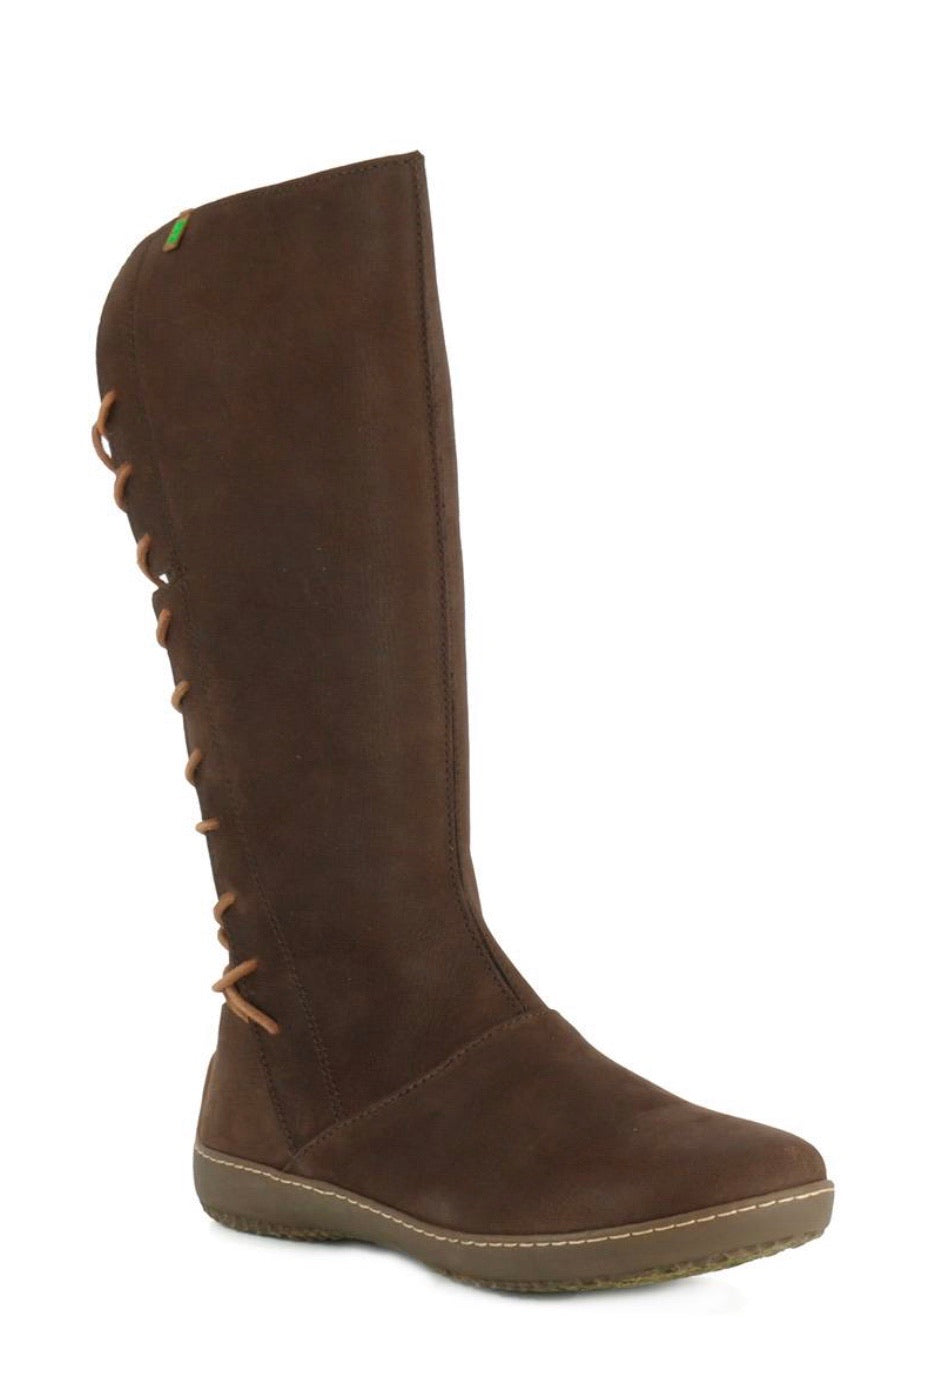 El Naturalista ND16 Brown Lace Up Zip High Boots Made In Spain